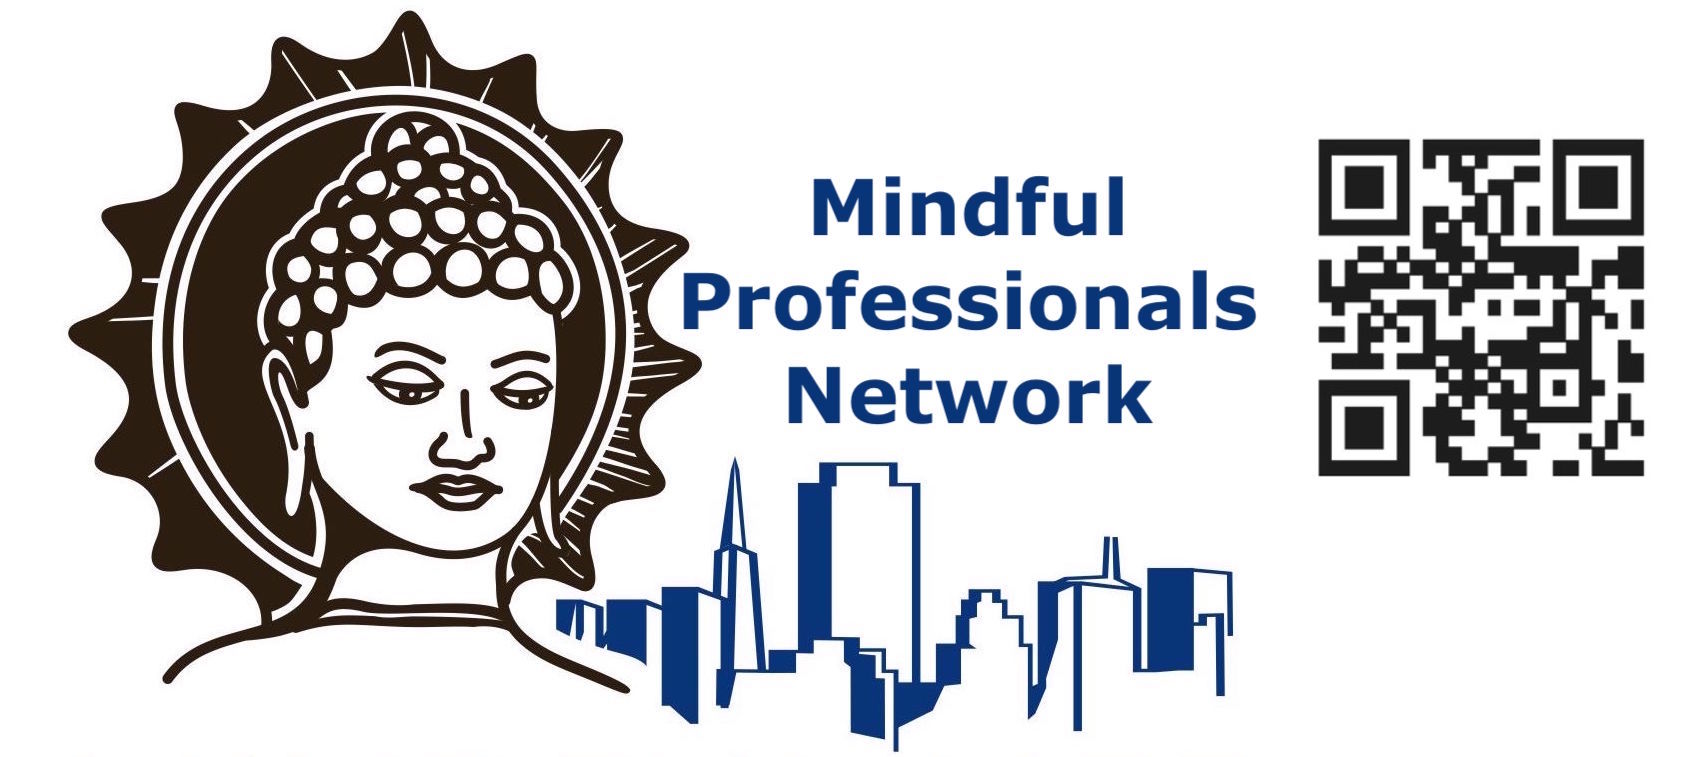 Mindful Professionals Network